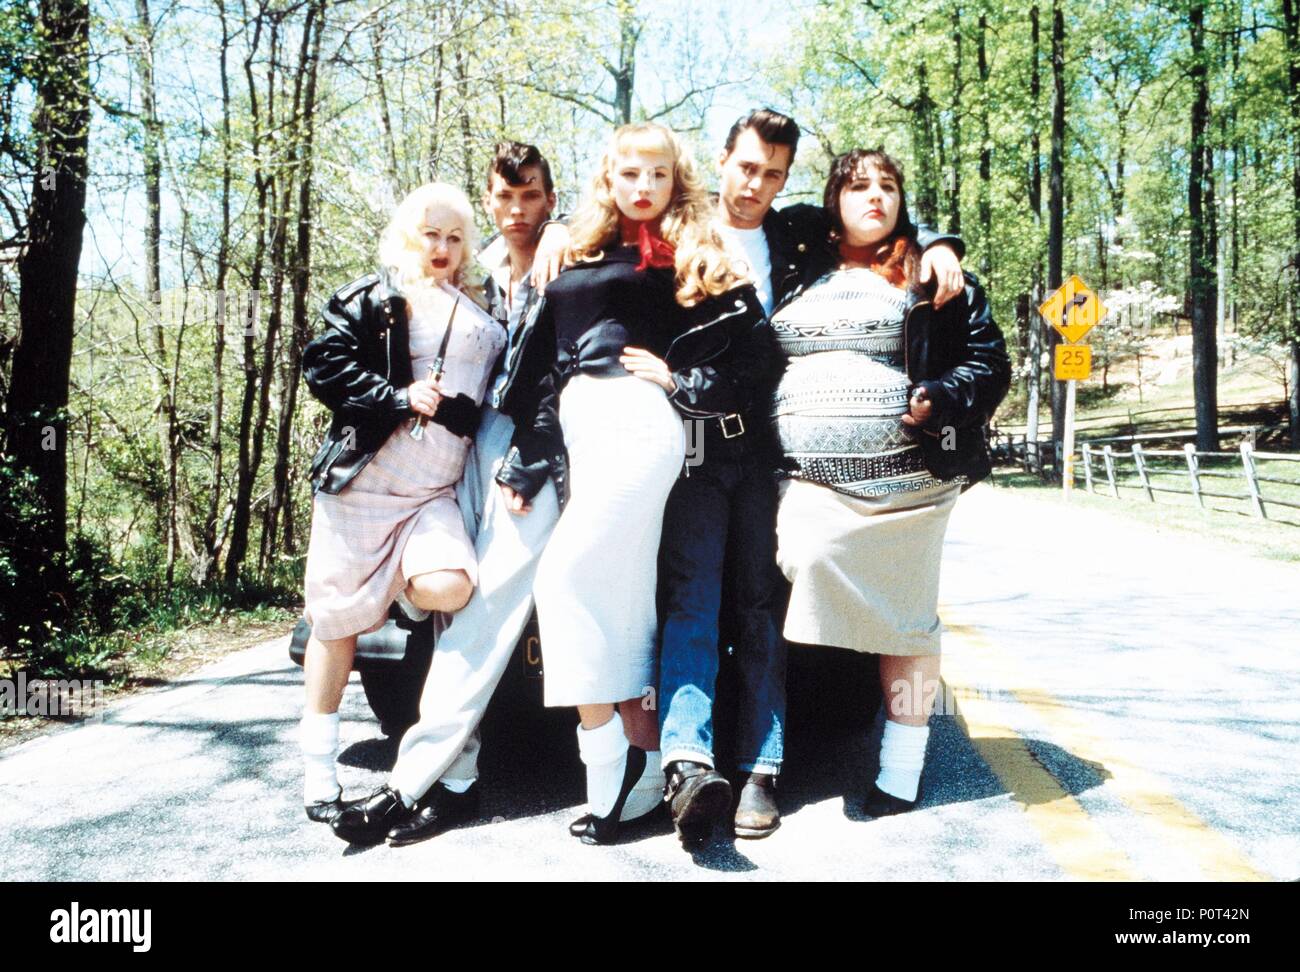 Original Film Title: CRY-BABY.  English Title: CRY-BABY.  Film Director: JOHN WATERS.  Year: 1990.  Stars: JOHNNY DEPP; RICKI LAKE; TRACI LORDS. Credit: UNIVERSAL PICTURES / Album Stock Photo